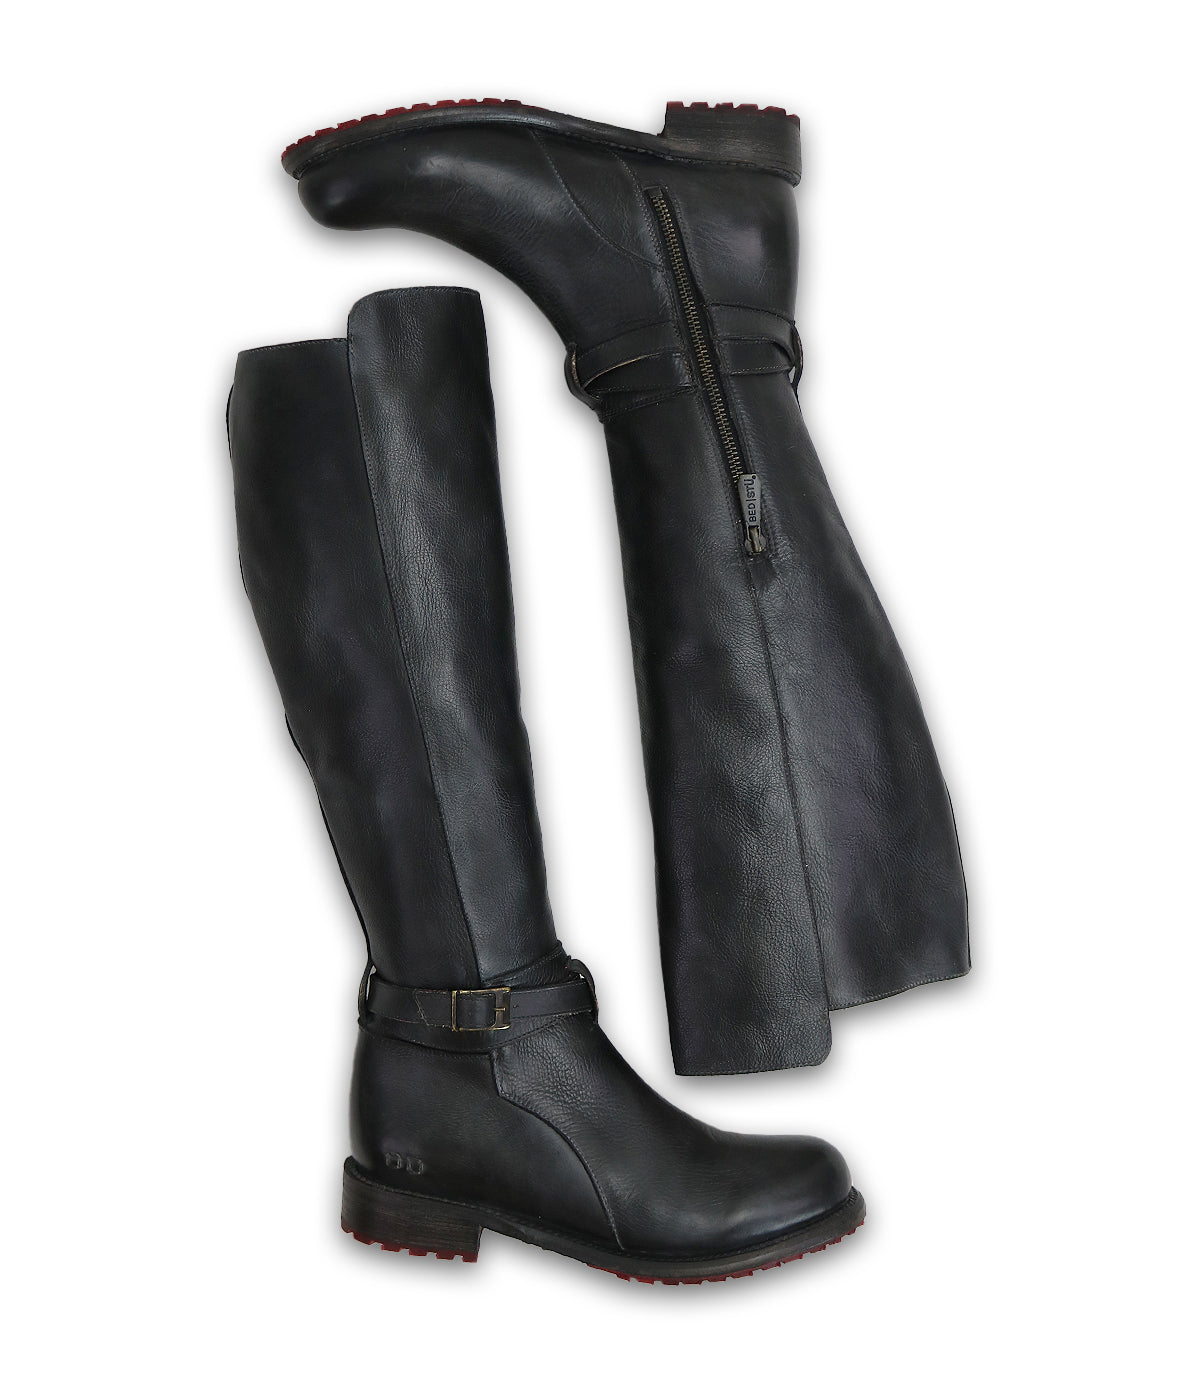 A pair of women's black leather Bed Stu Bristol riding boots.